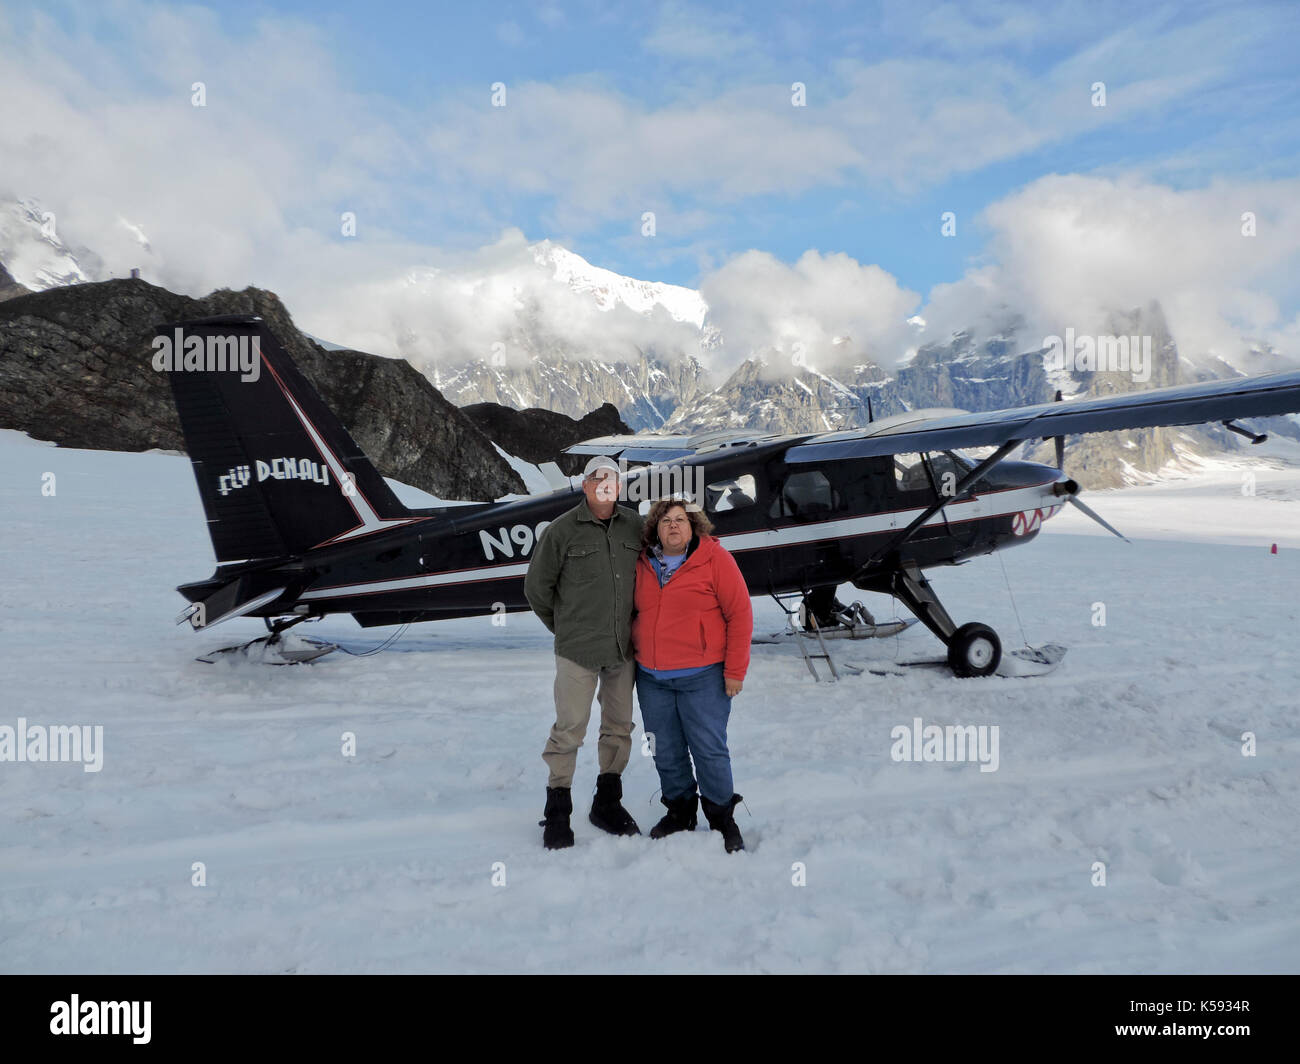 COUPLE TAKING PHOTOGRAPH IN FRONT OF AIRPLANE ON GLACIER TOUR, ALASKA Stock Photo